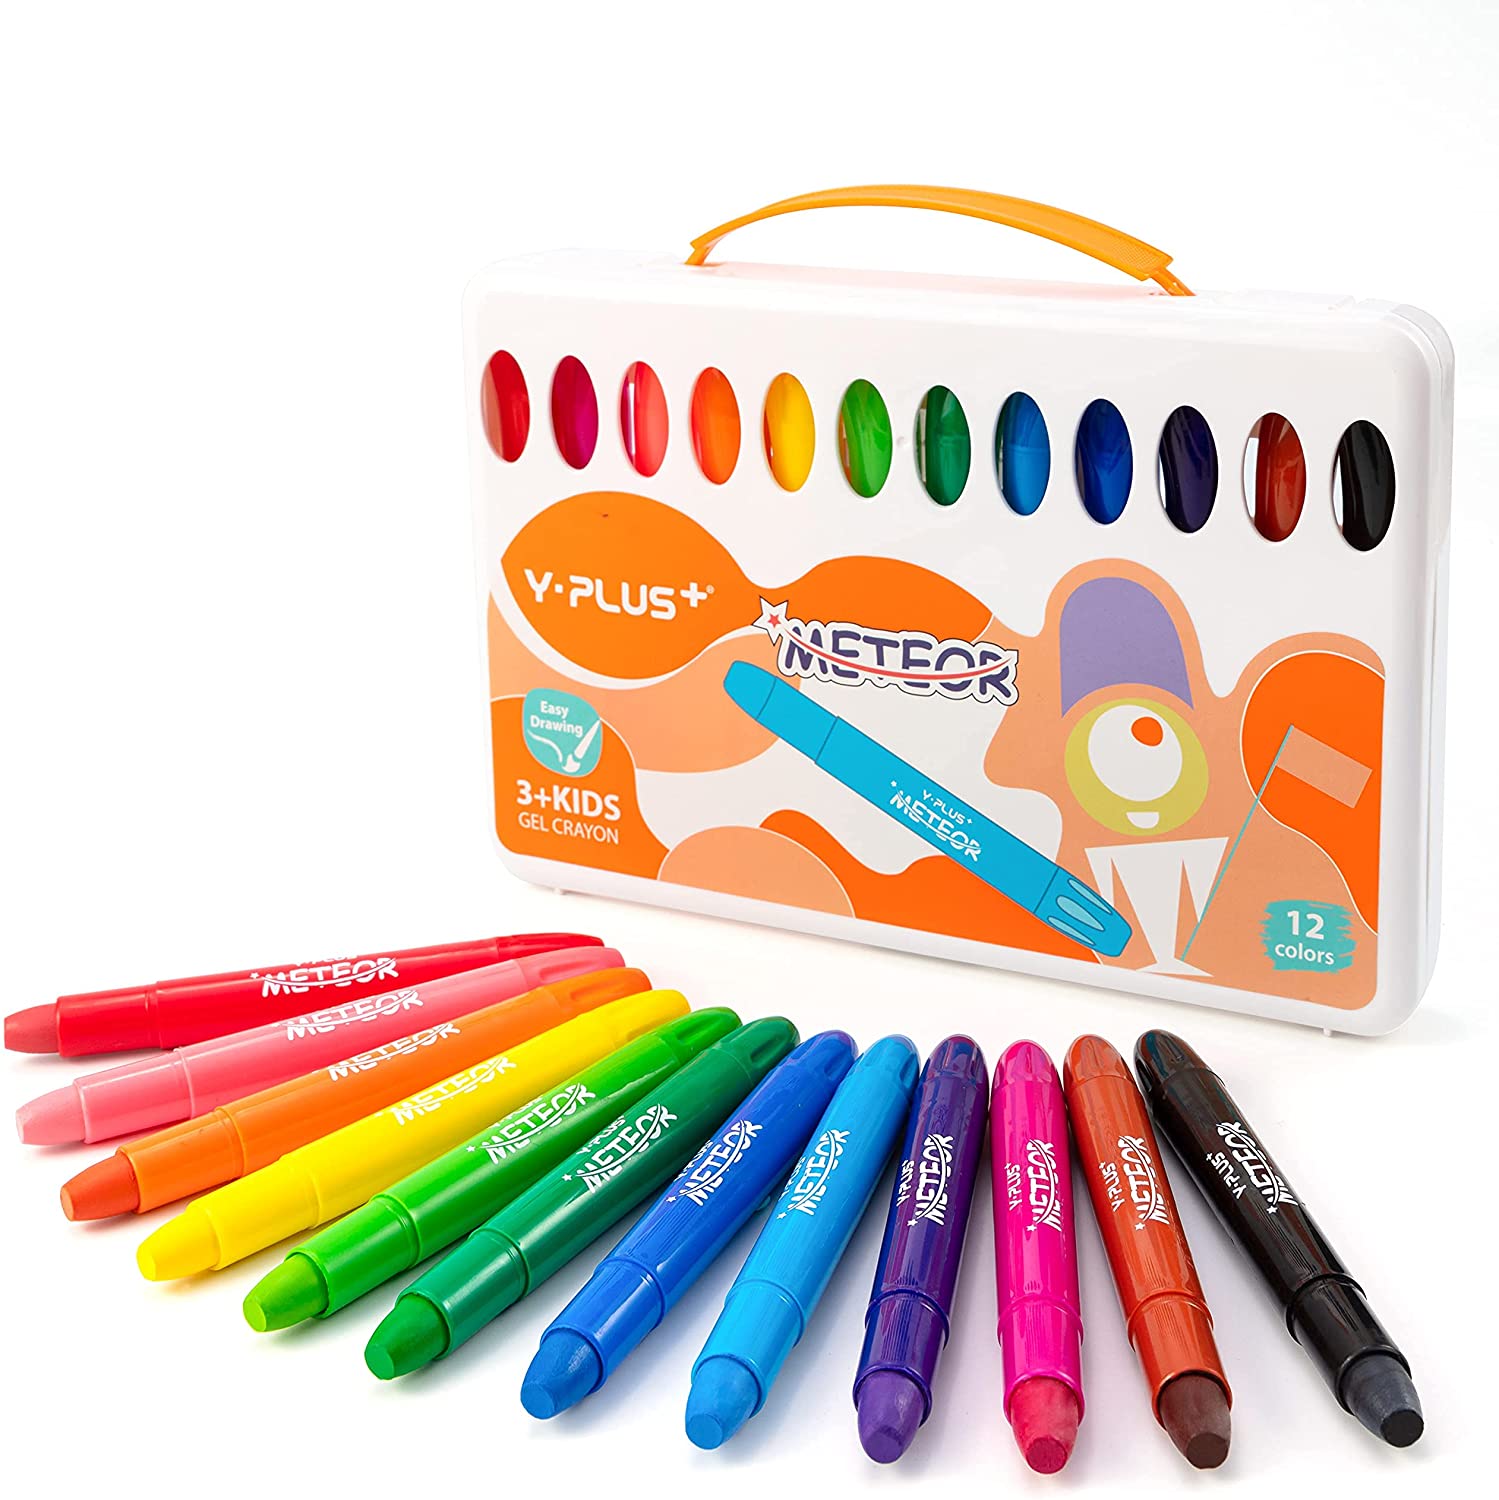 Easy To Hold Silky Large Crayons, 12 Colors Non Toxic